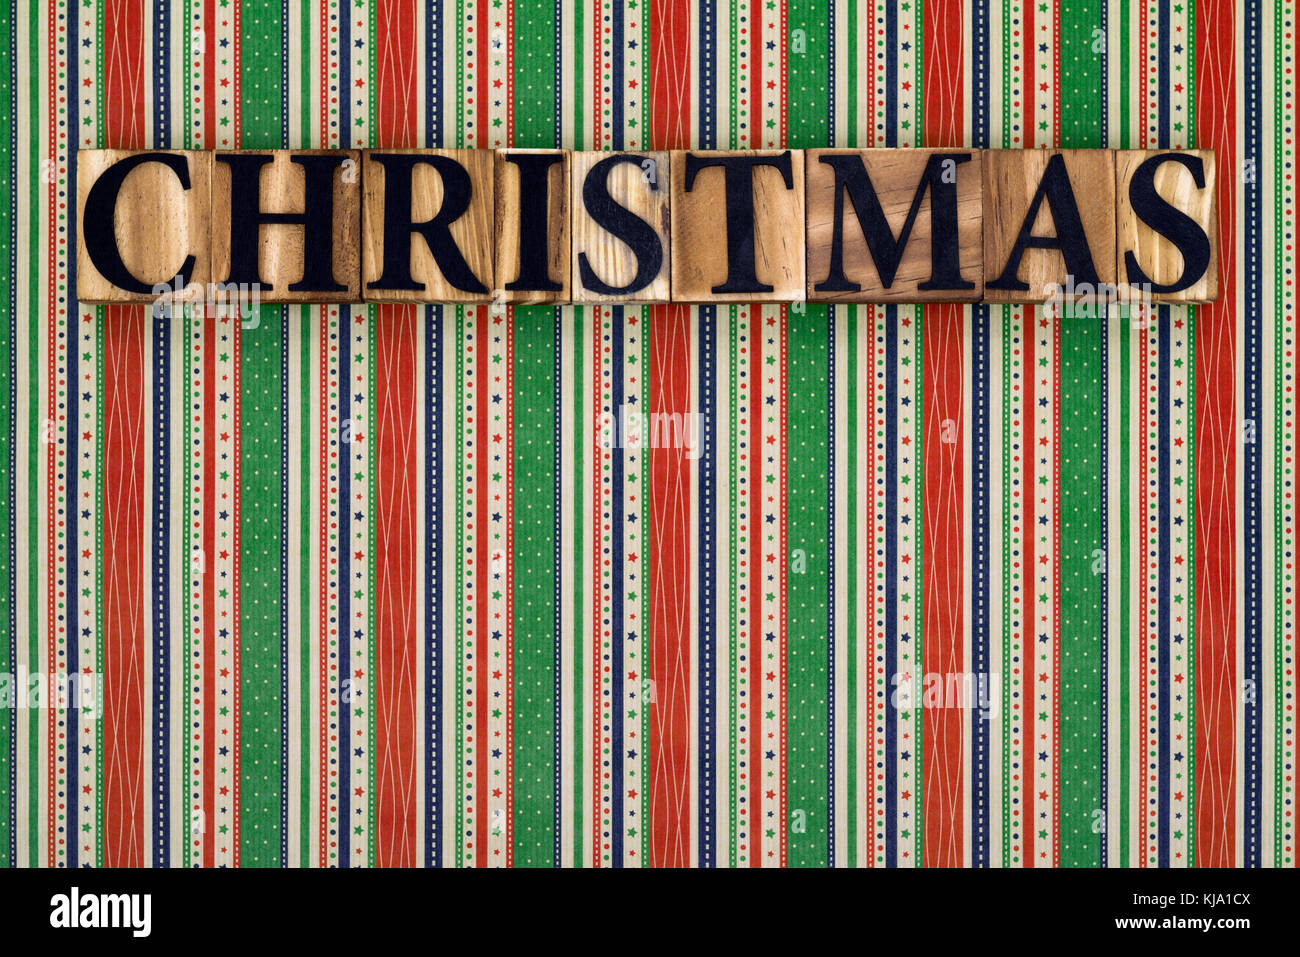 The word Christmas made from wooden block letters on a colourful striped background. Stock Photo